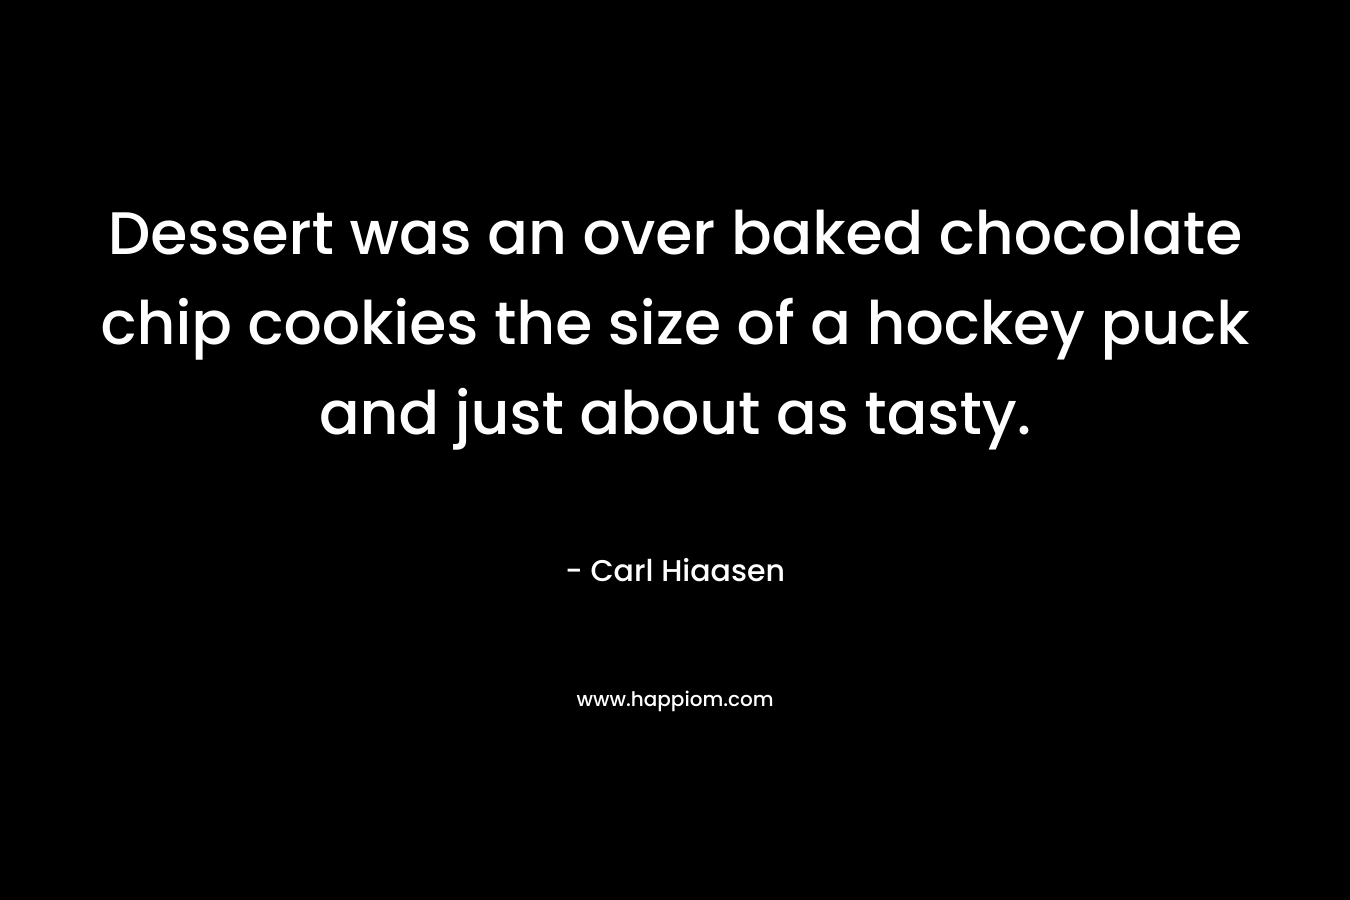 Dessert was an over baked chocolate chip cookies the size of a hockey puck and just about as tasty. – Carl Hiaasen